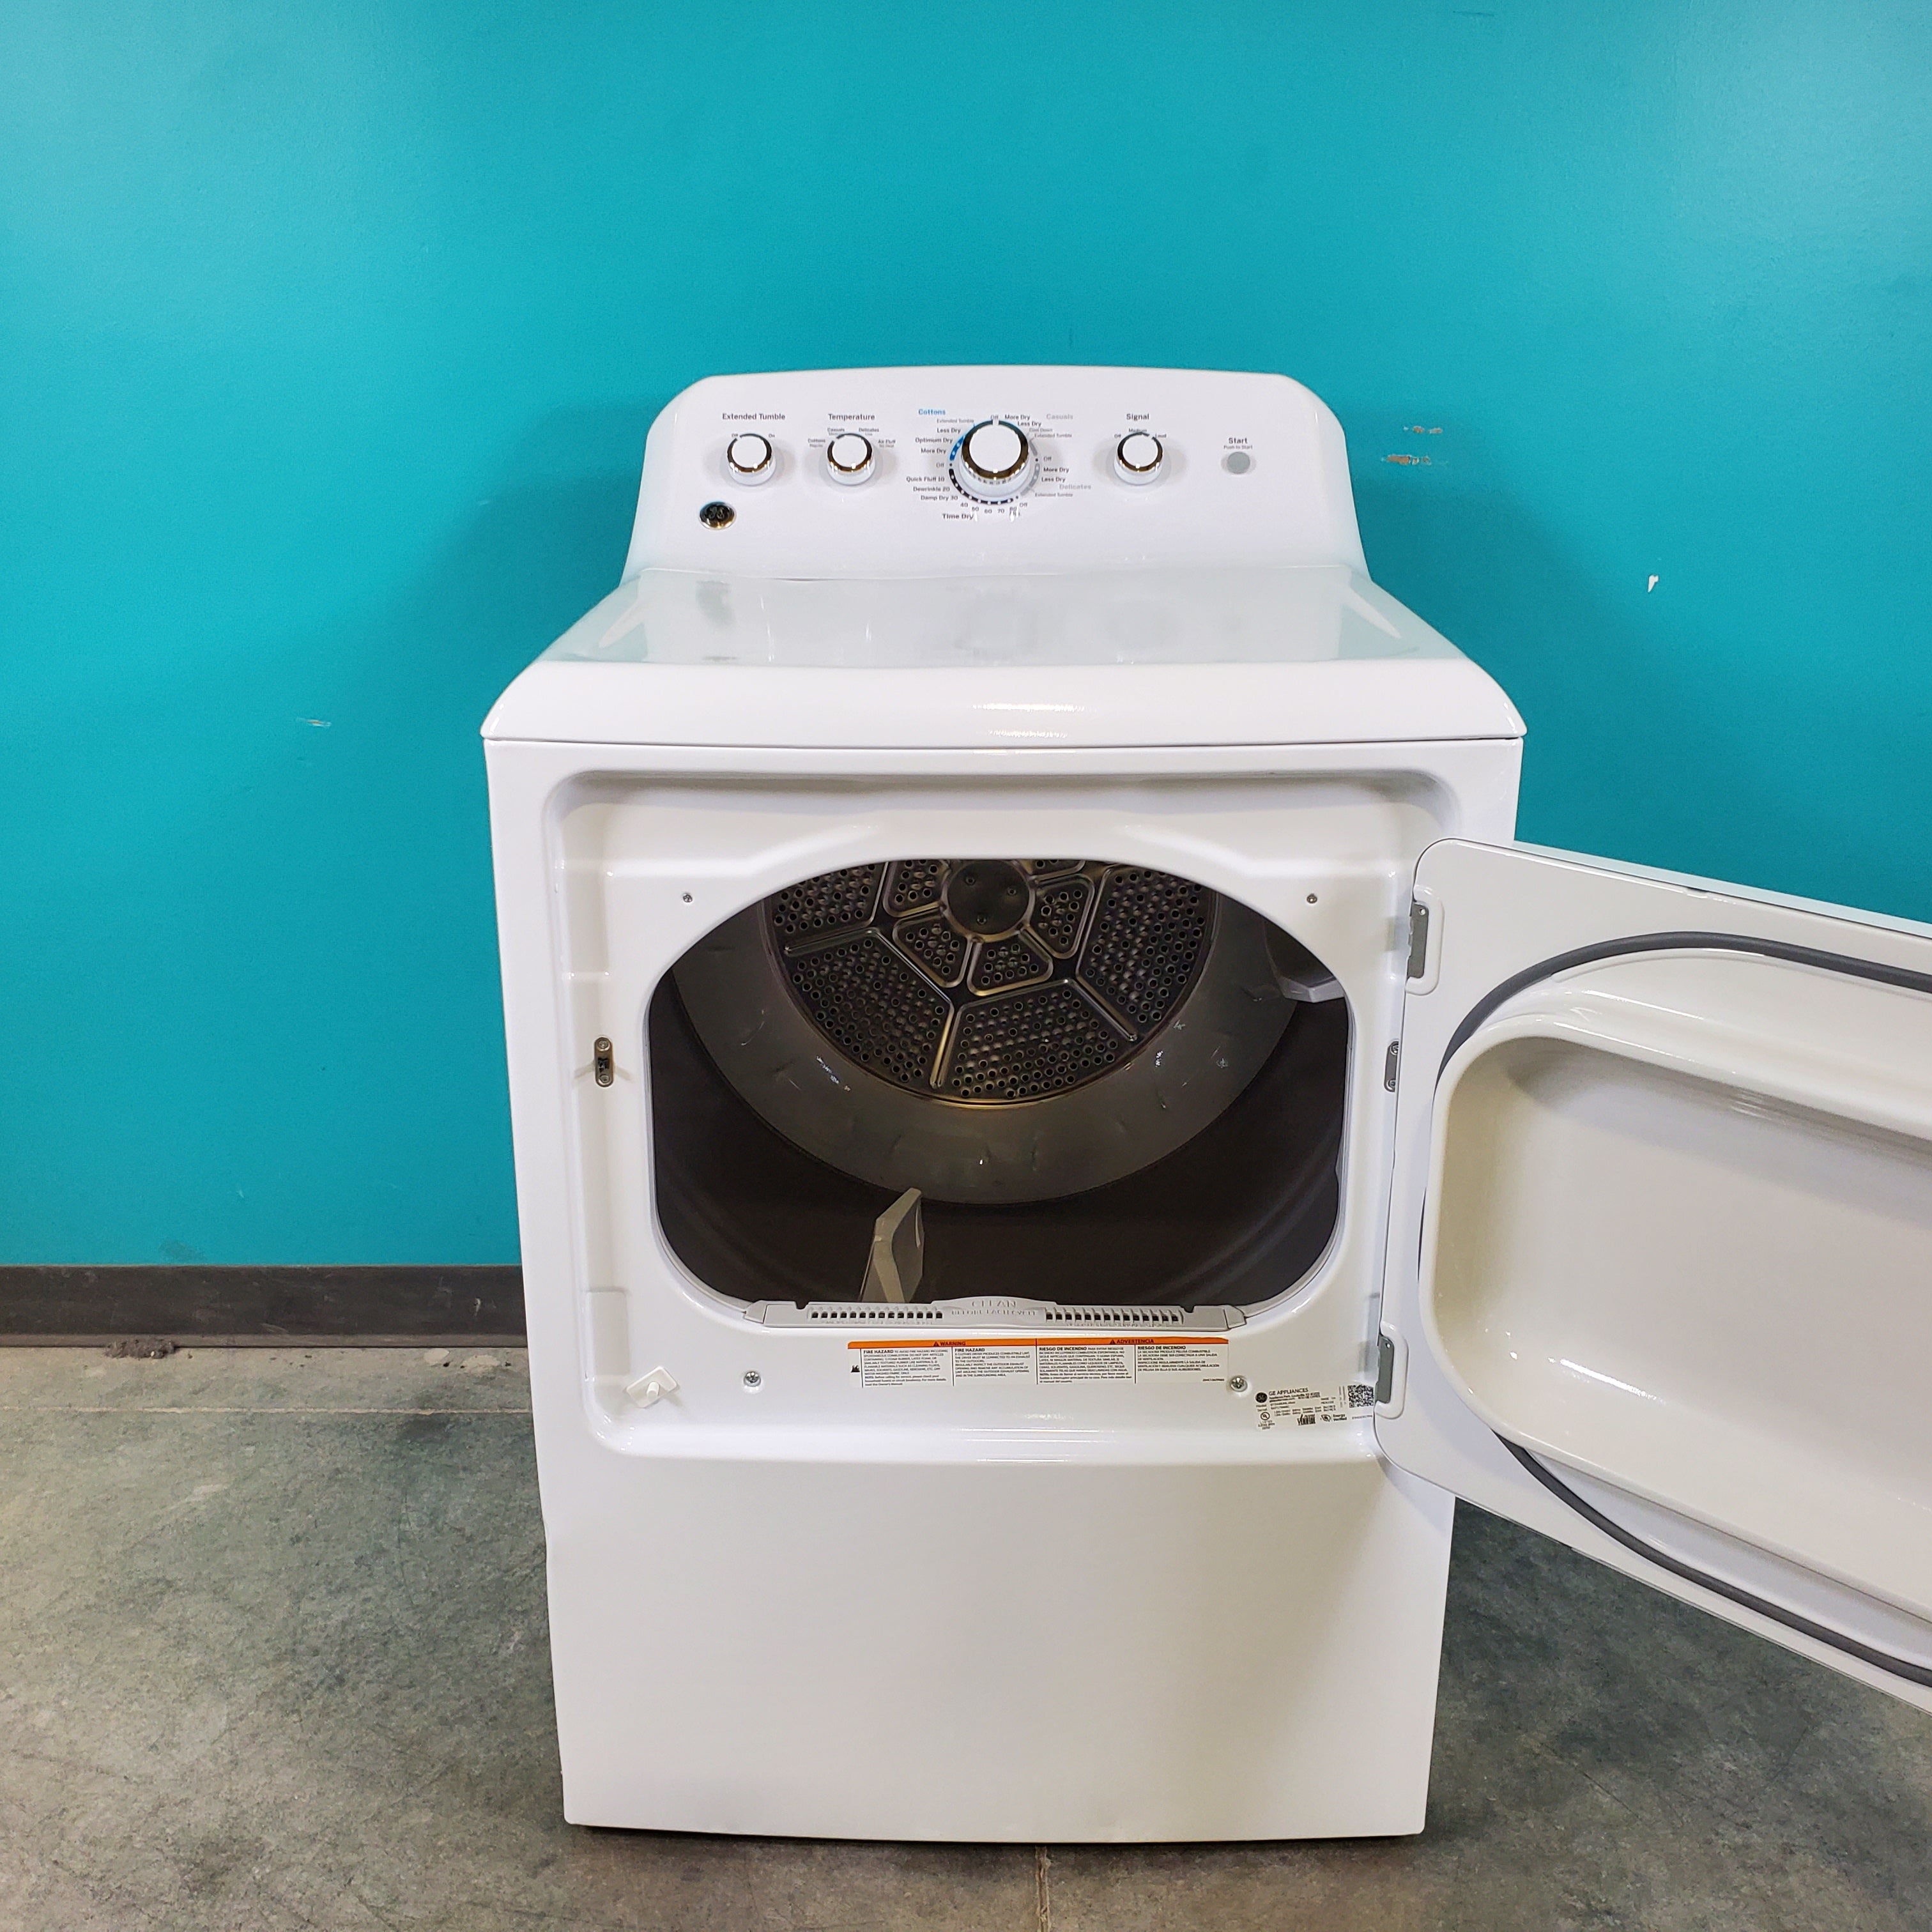 Pictures of Neu Select GE 7.2 cu. ft. Electric 220v Dryer With Auto Sensor Dry - Certified Refurbished - Neu Appliance Outlet - Discount Appliance Outlet in Austin, Tx